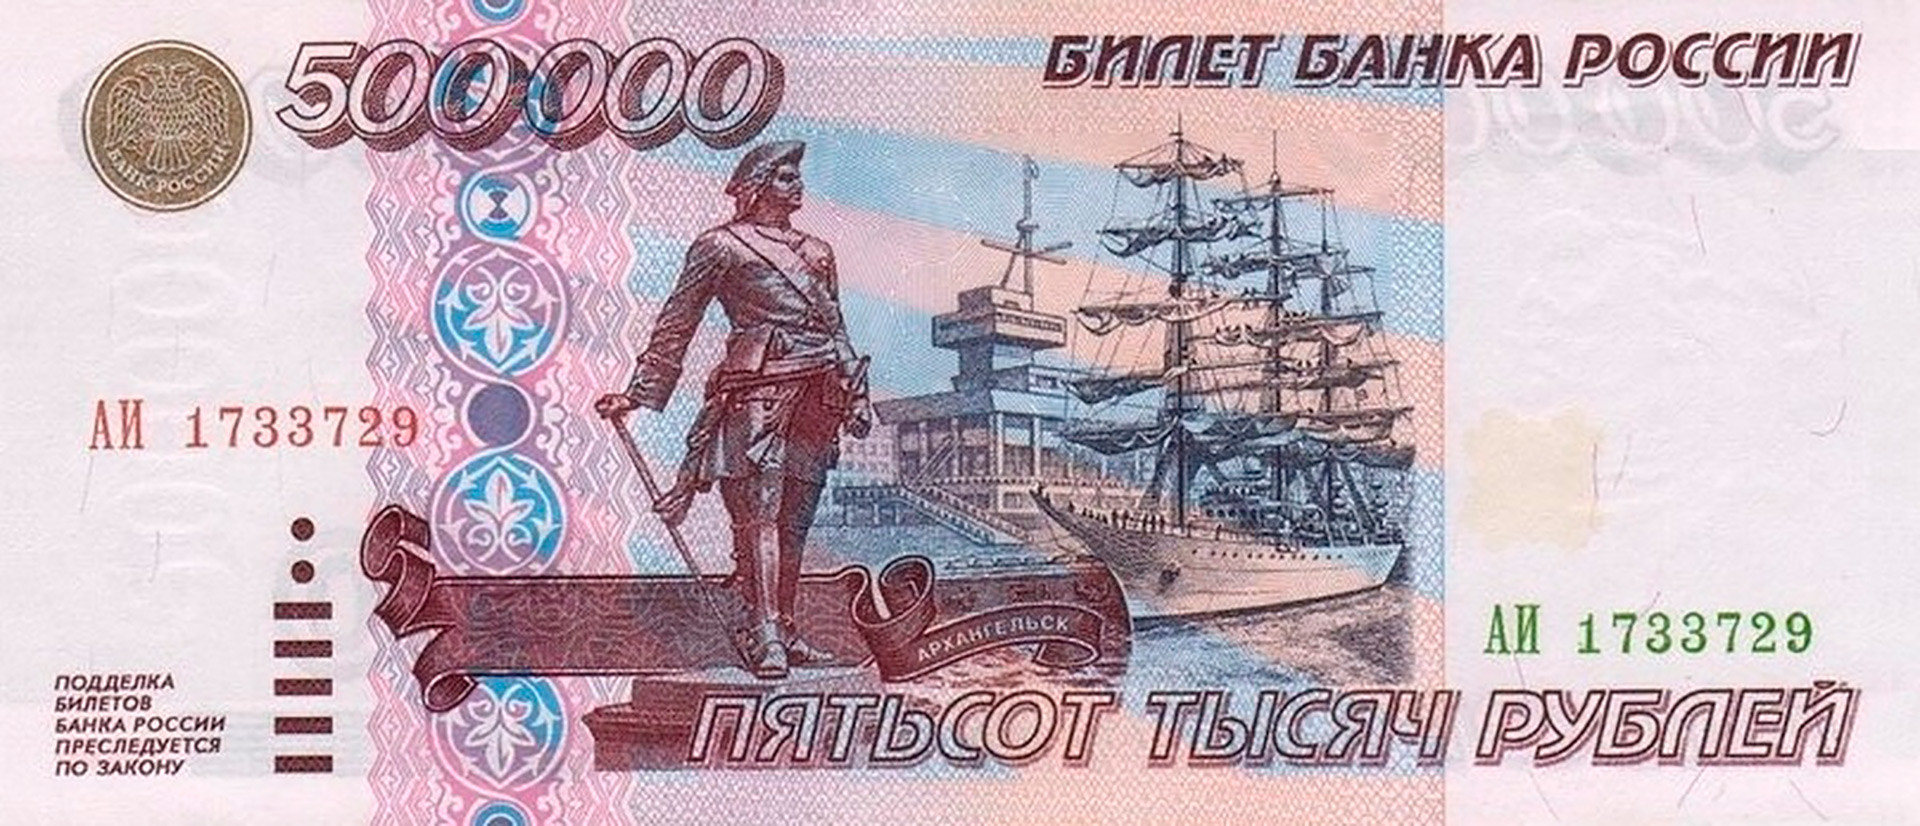 A 500,000-ruble banknote